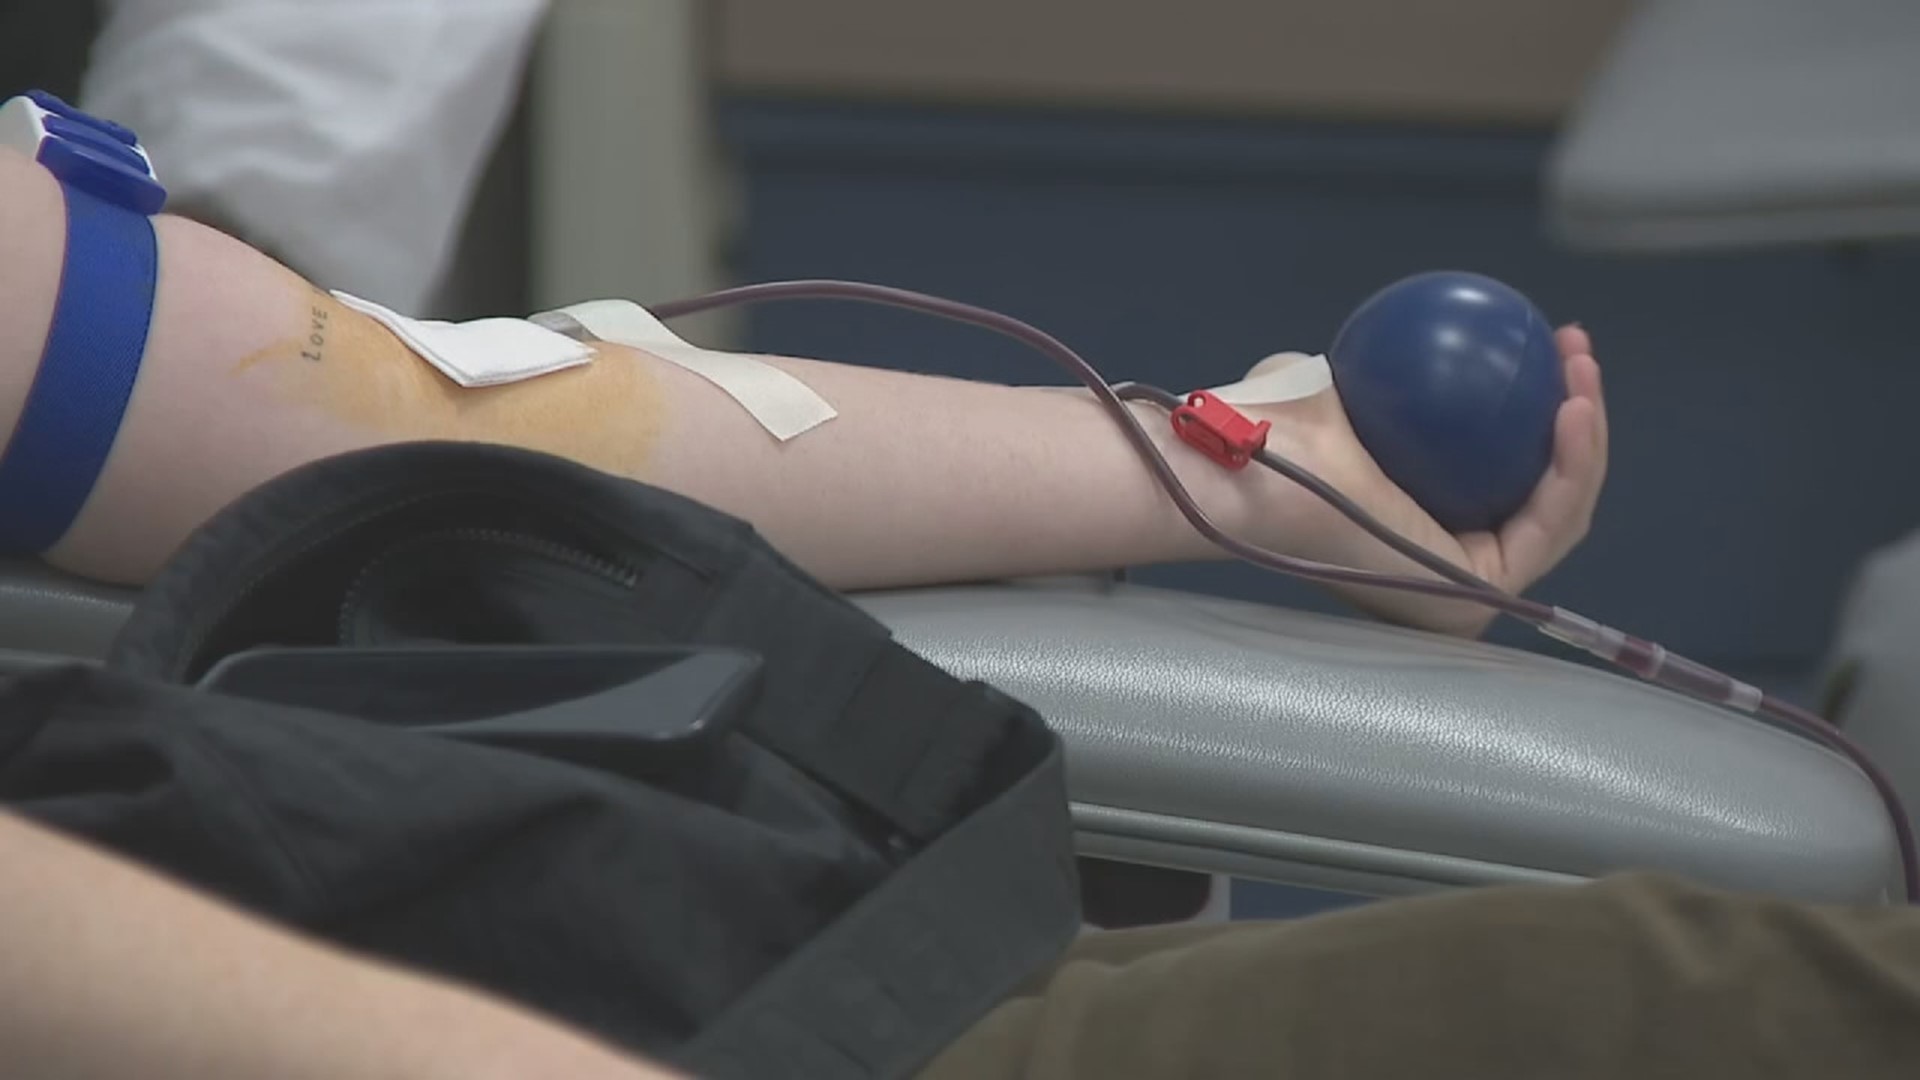 The American Red Cross is offering incentives for donating blood while going through the worst emergency blood shortage in two decades.